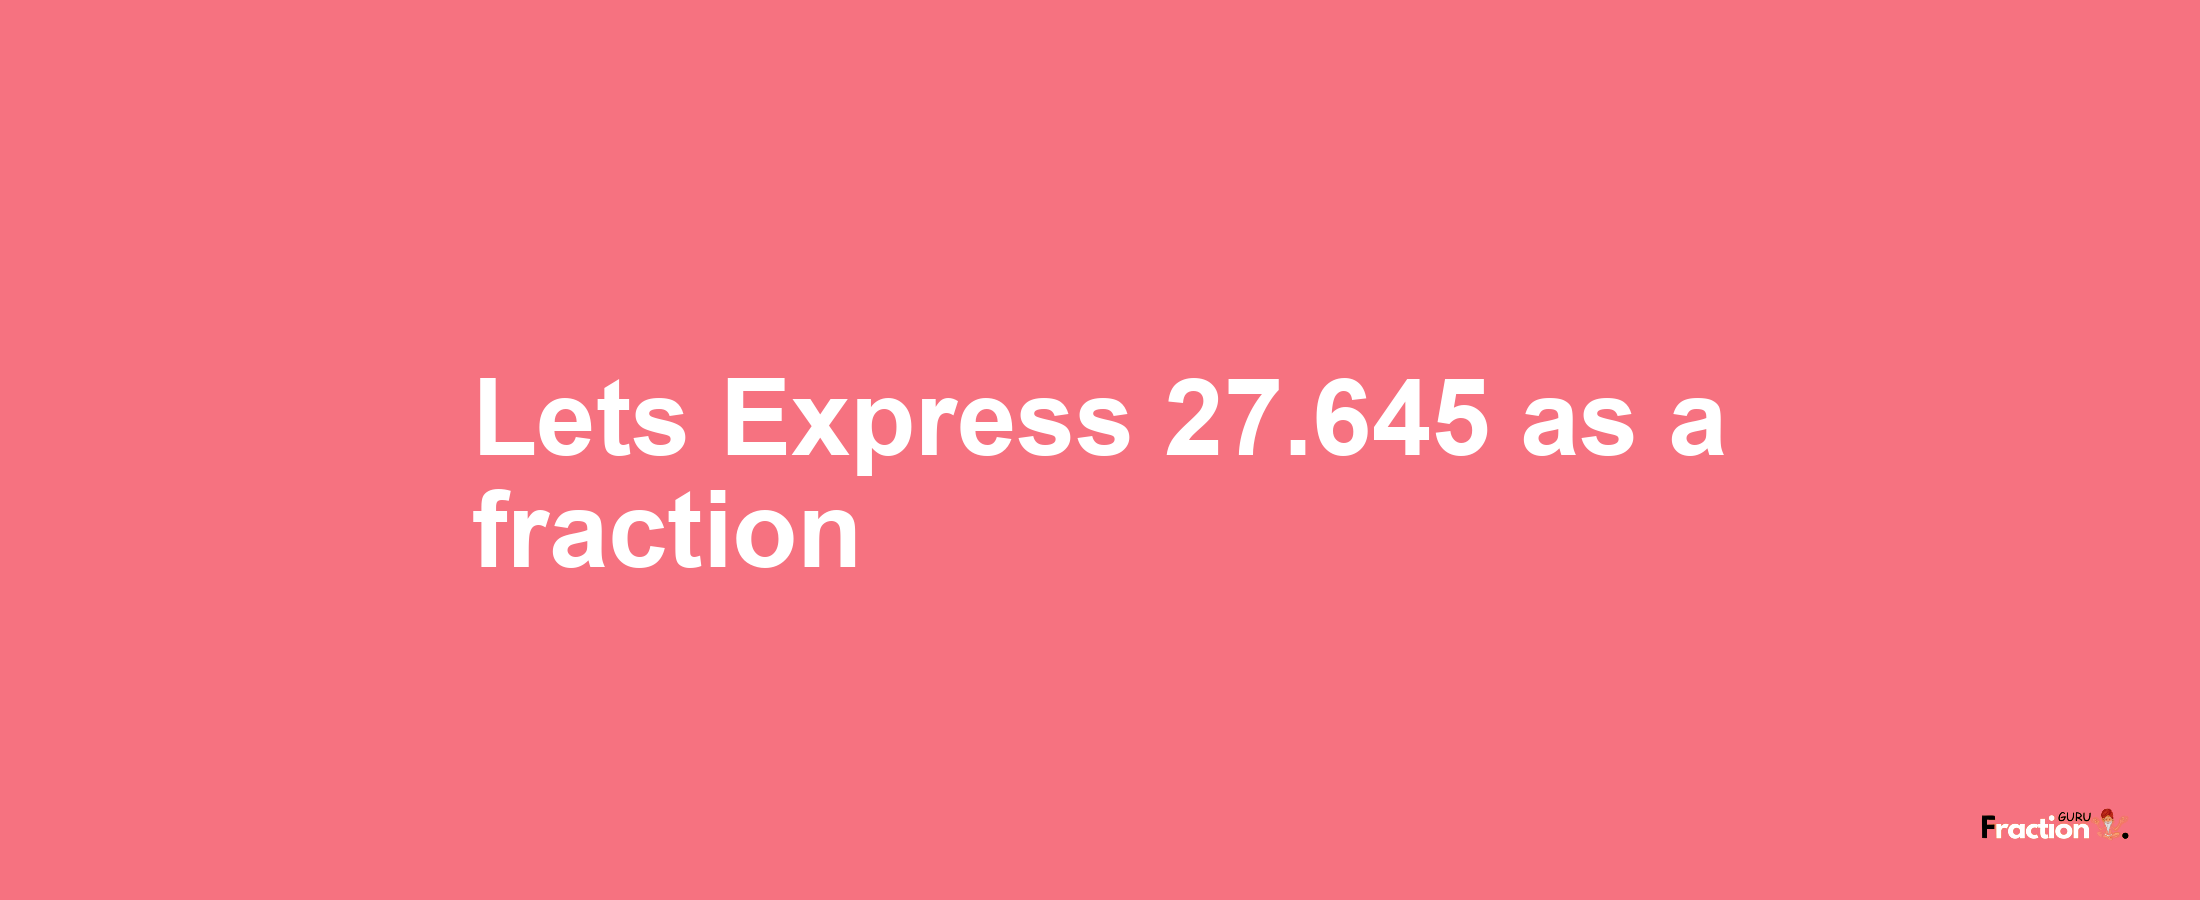 Lets Express 27.645 as afraction